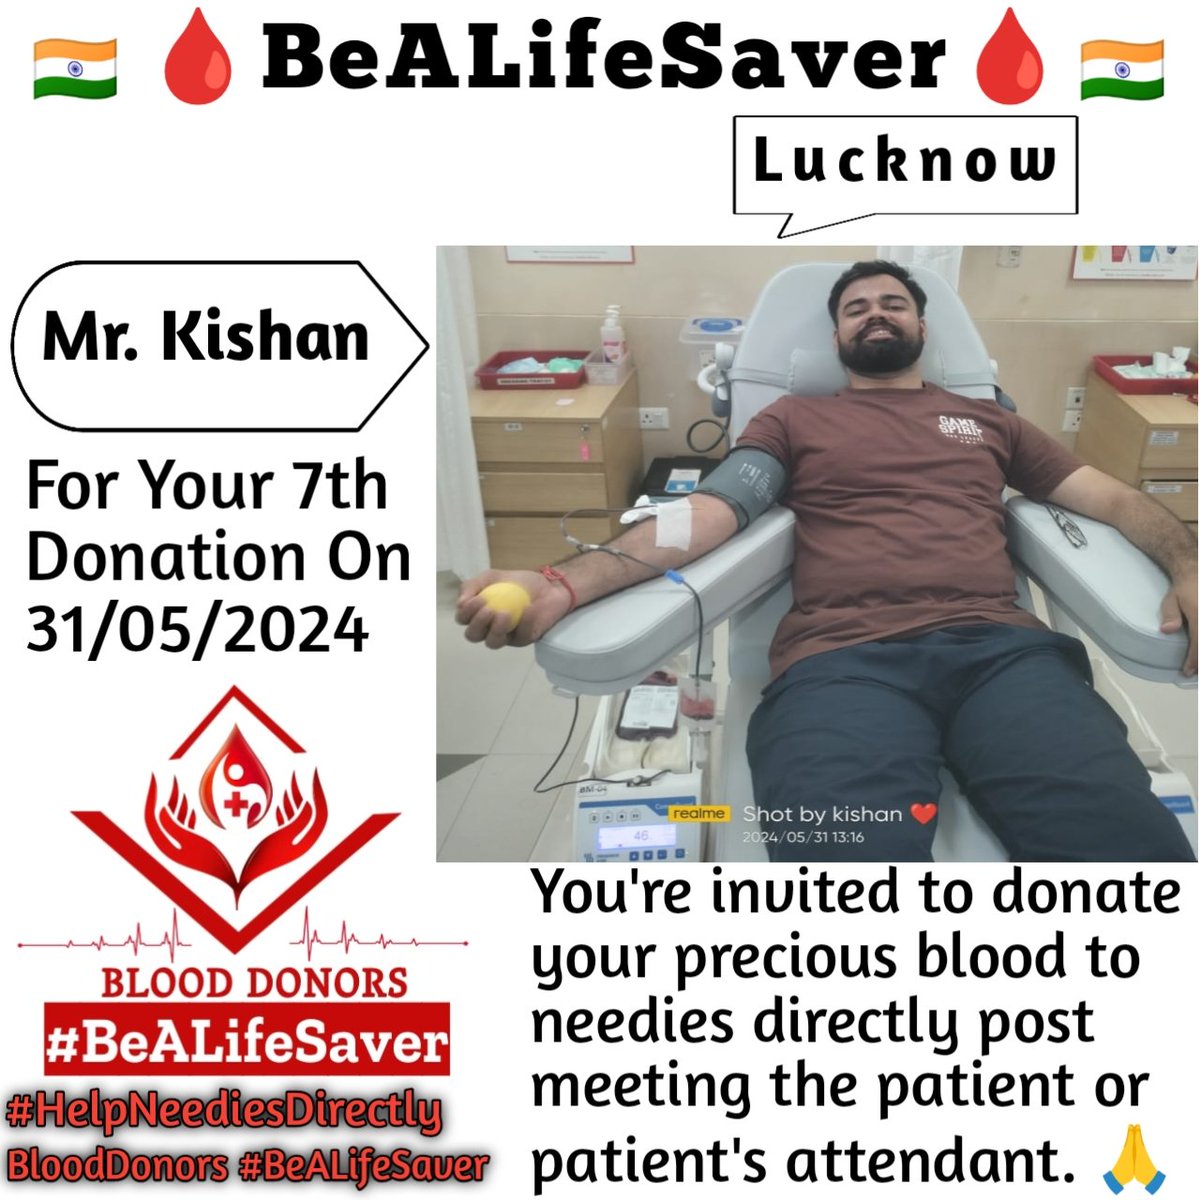 🙏 Congrats To Mr. Kishan Ji For His 7th Blood Donation 🙏 #HelpNeediesDirectly #BeALifeSaver Today's hero, Mr. Kishan Ji, donated blood in Lucknow for the 7th time to help a patient in need. Heartfelt gratitude and respect for his selfless act.